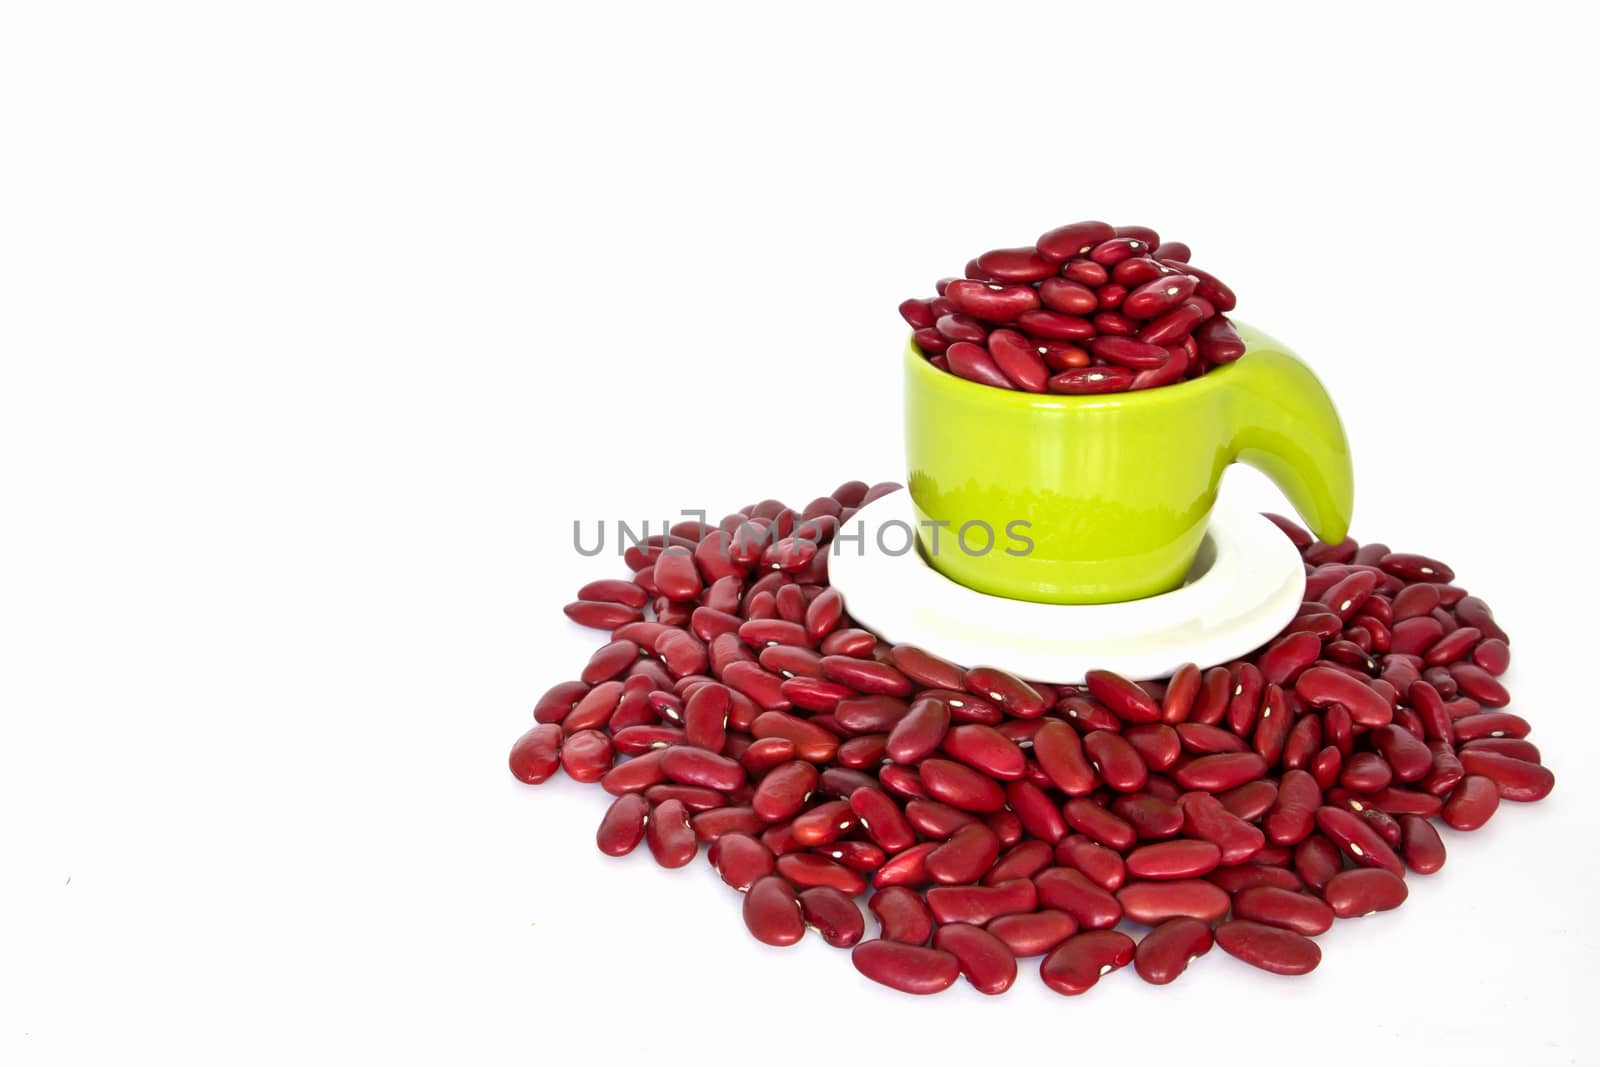 Red beans in green cup on white background